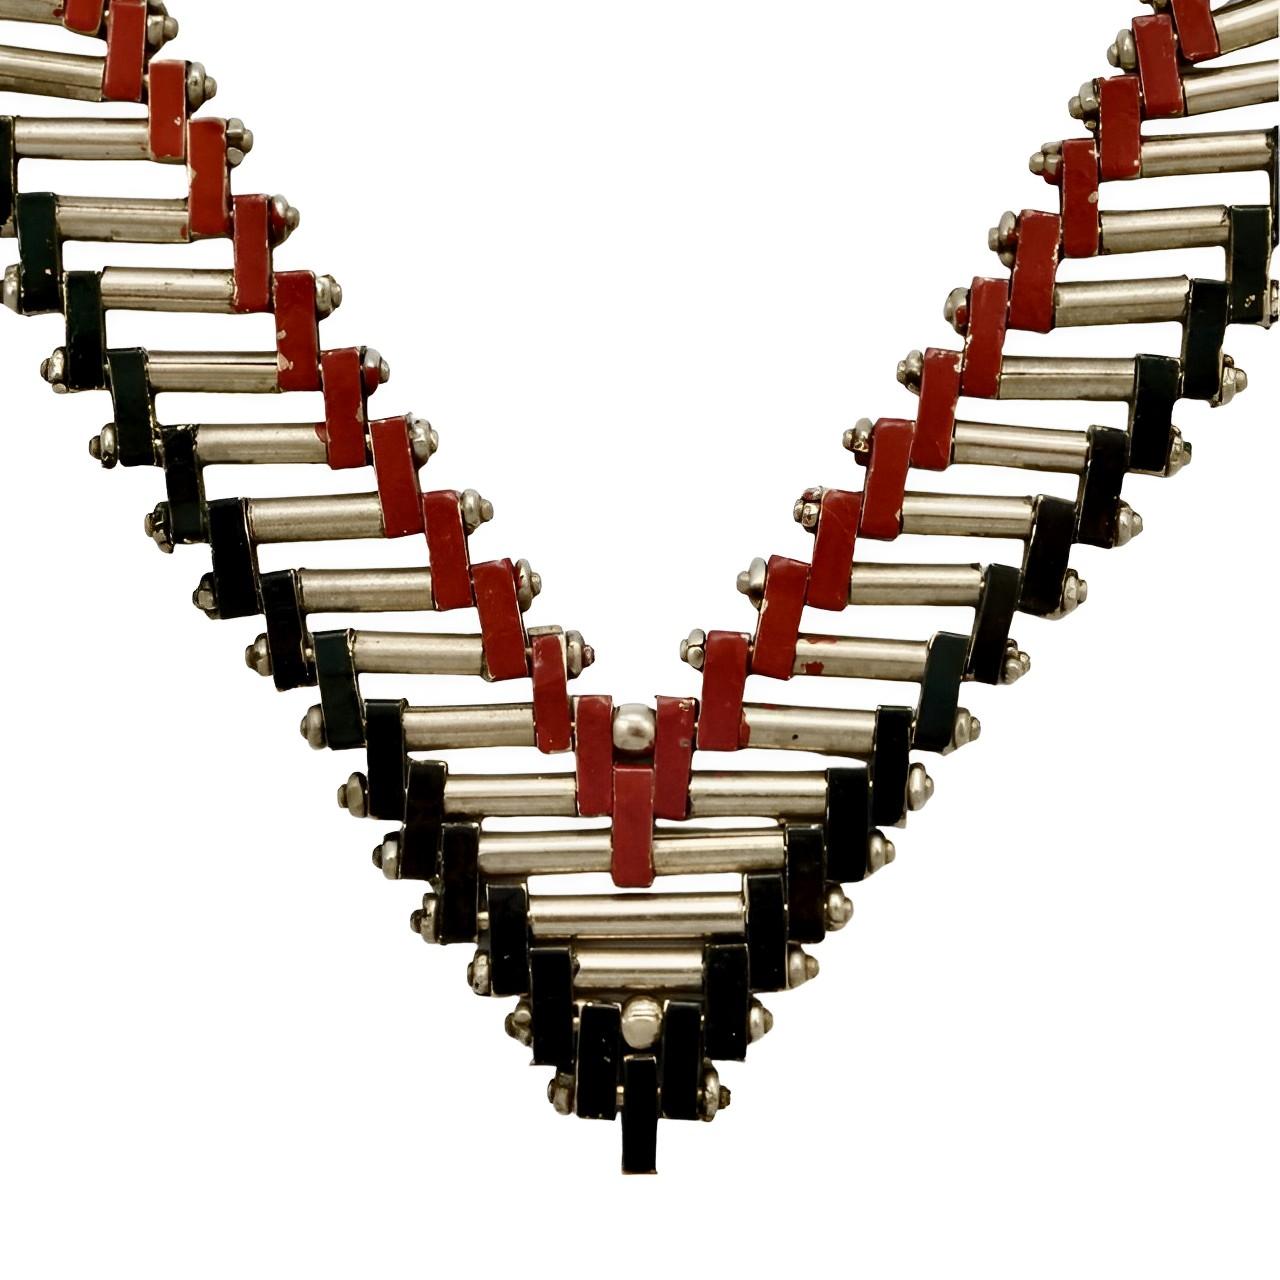 Fabulous Jakob Bengel Art Deco chrome brickwork and bar necklace, featuring red and black enamel. Measuring length approximately 45 cm / 17.7 inches by width 1.6 cm / .6 inch. The necklace is in very good condition, with minor chipping to the